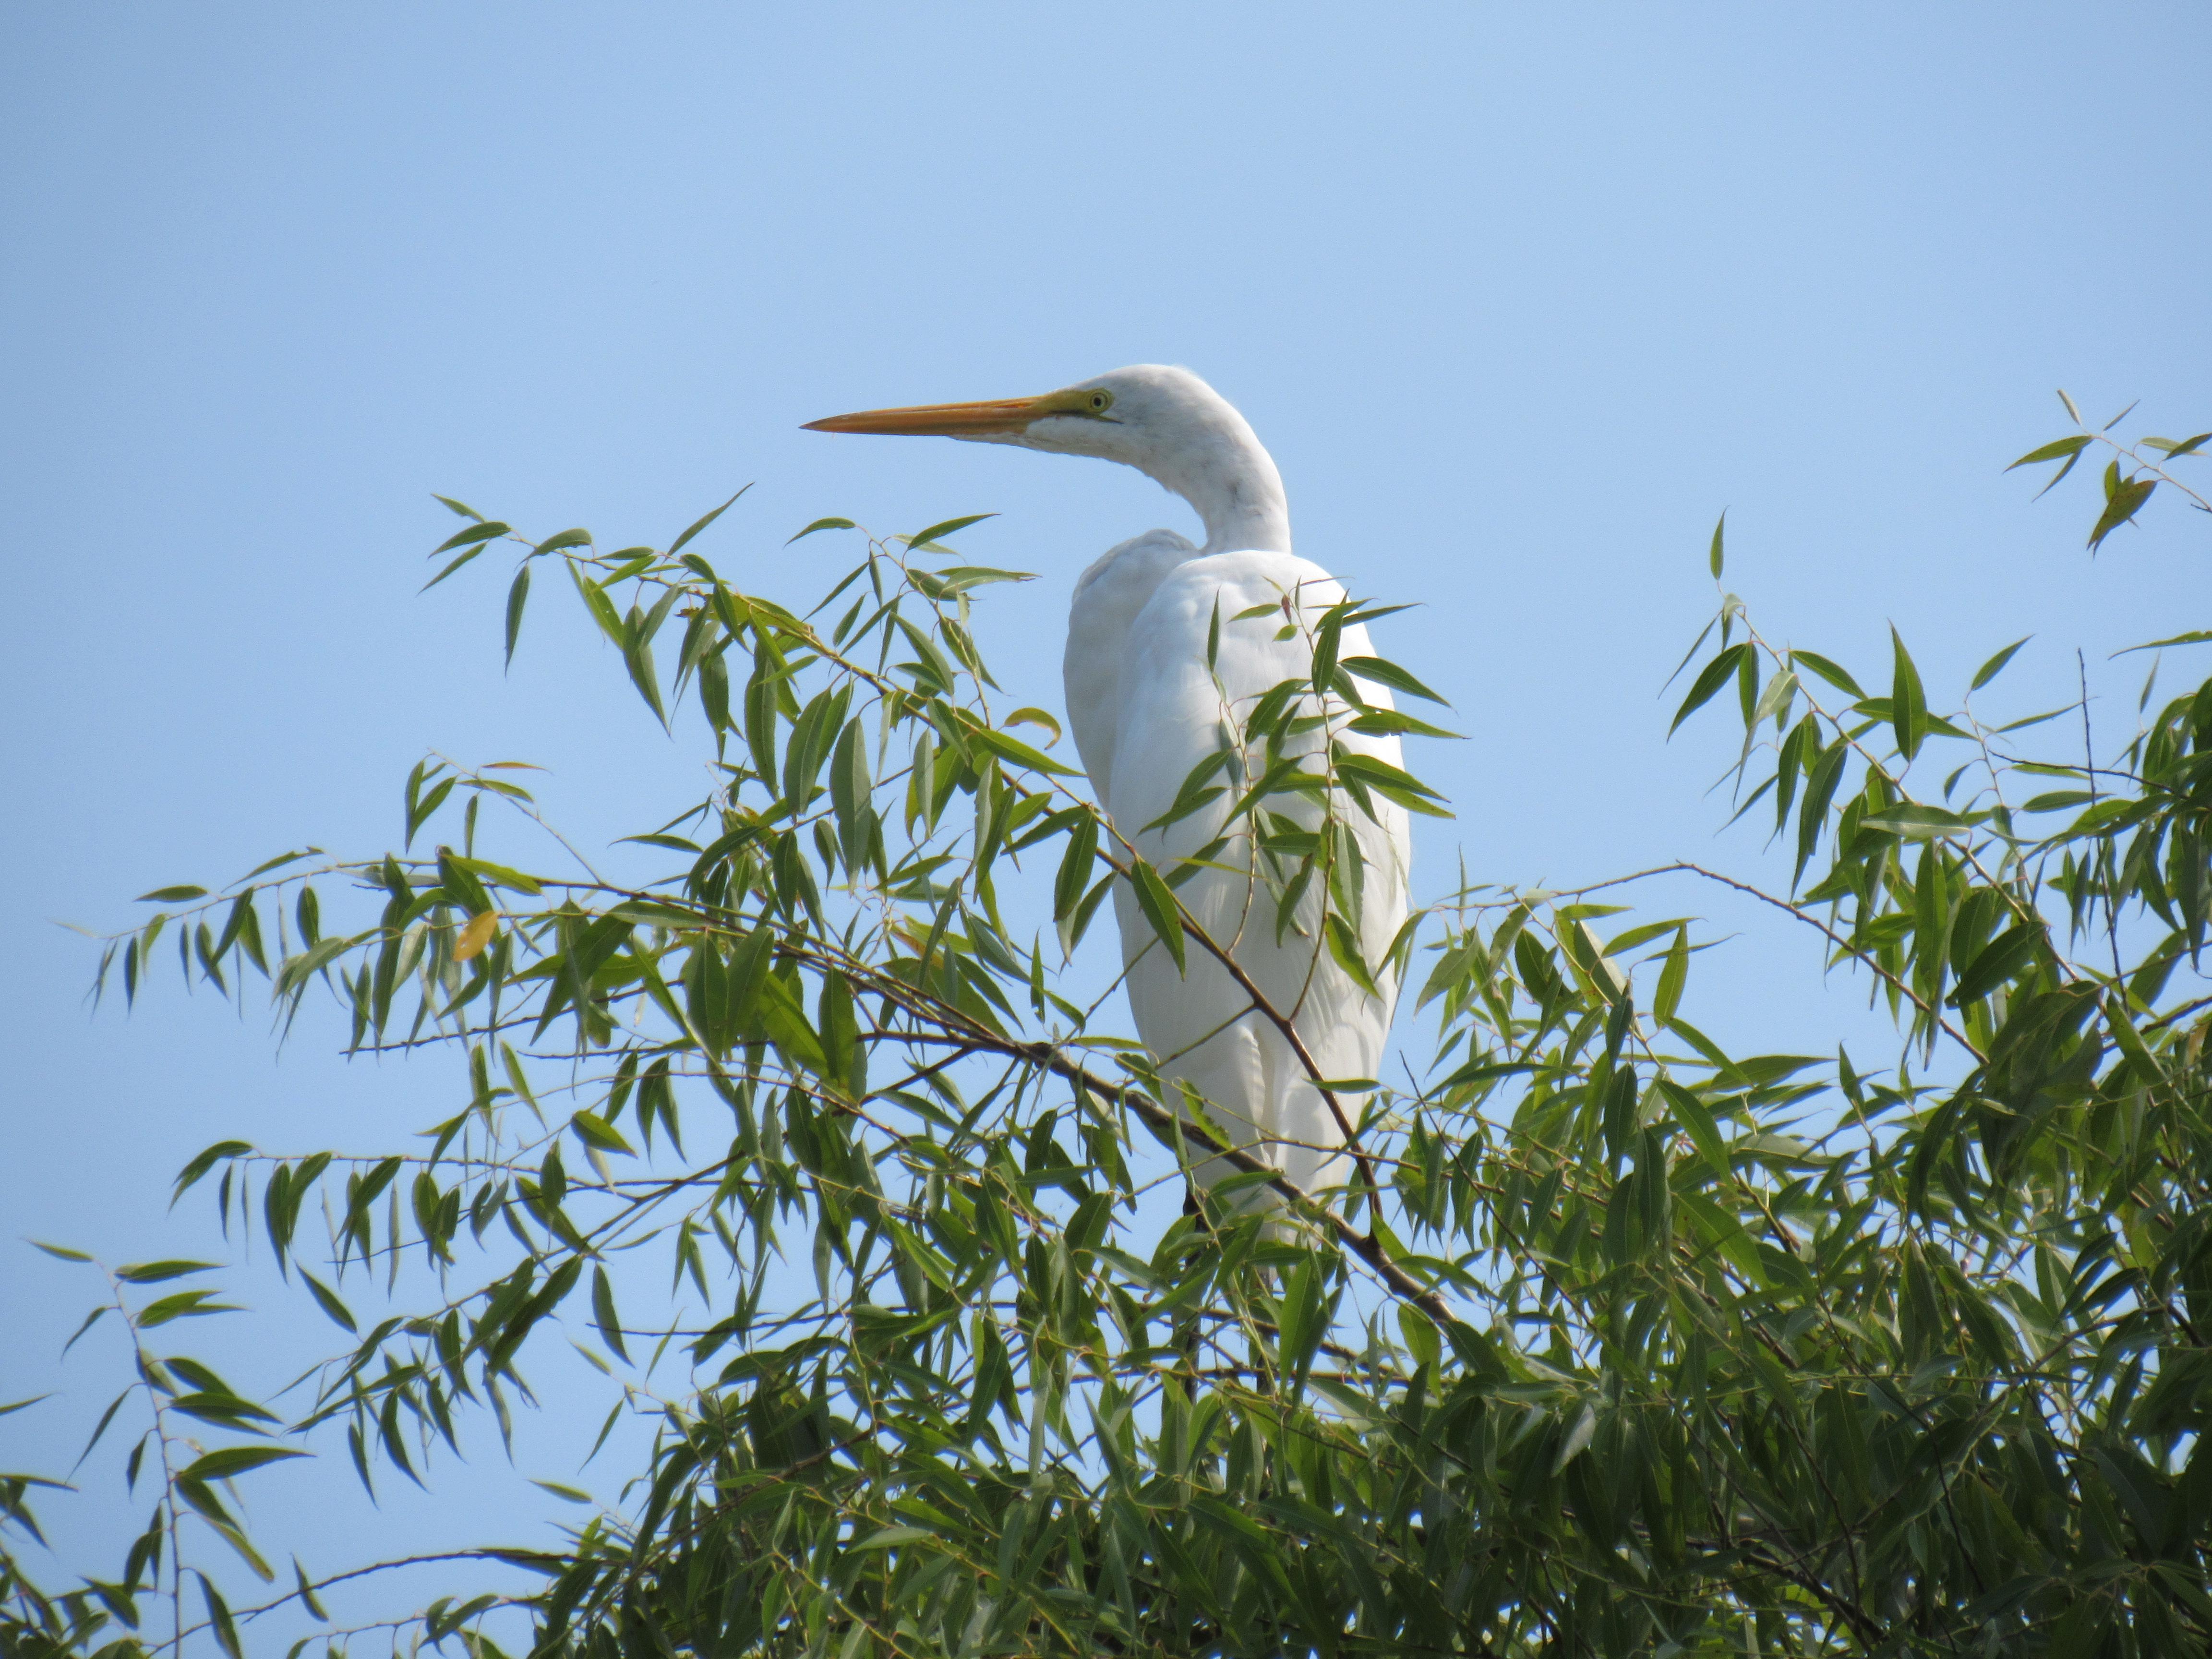 A white Great Egret sitting in a tree.